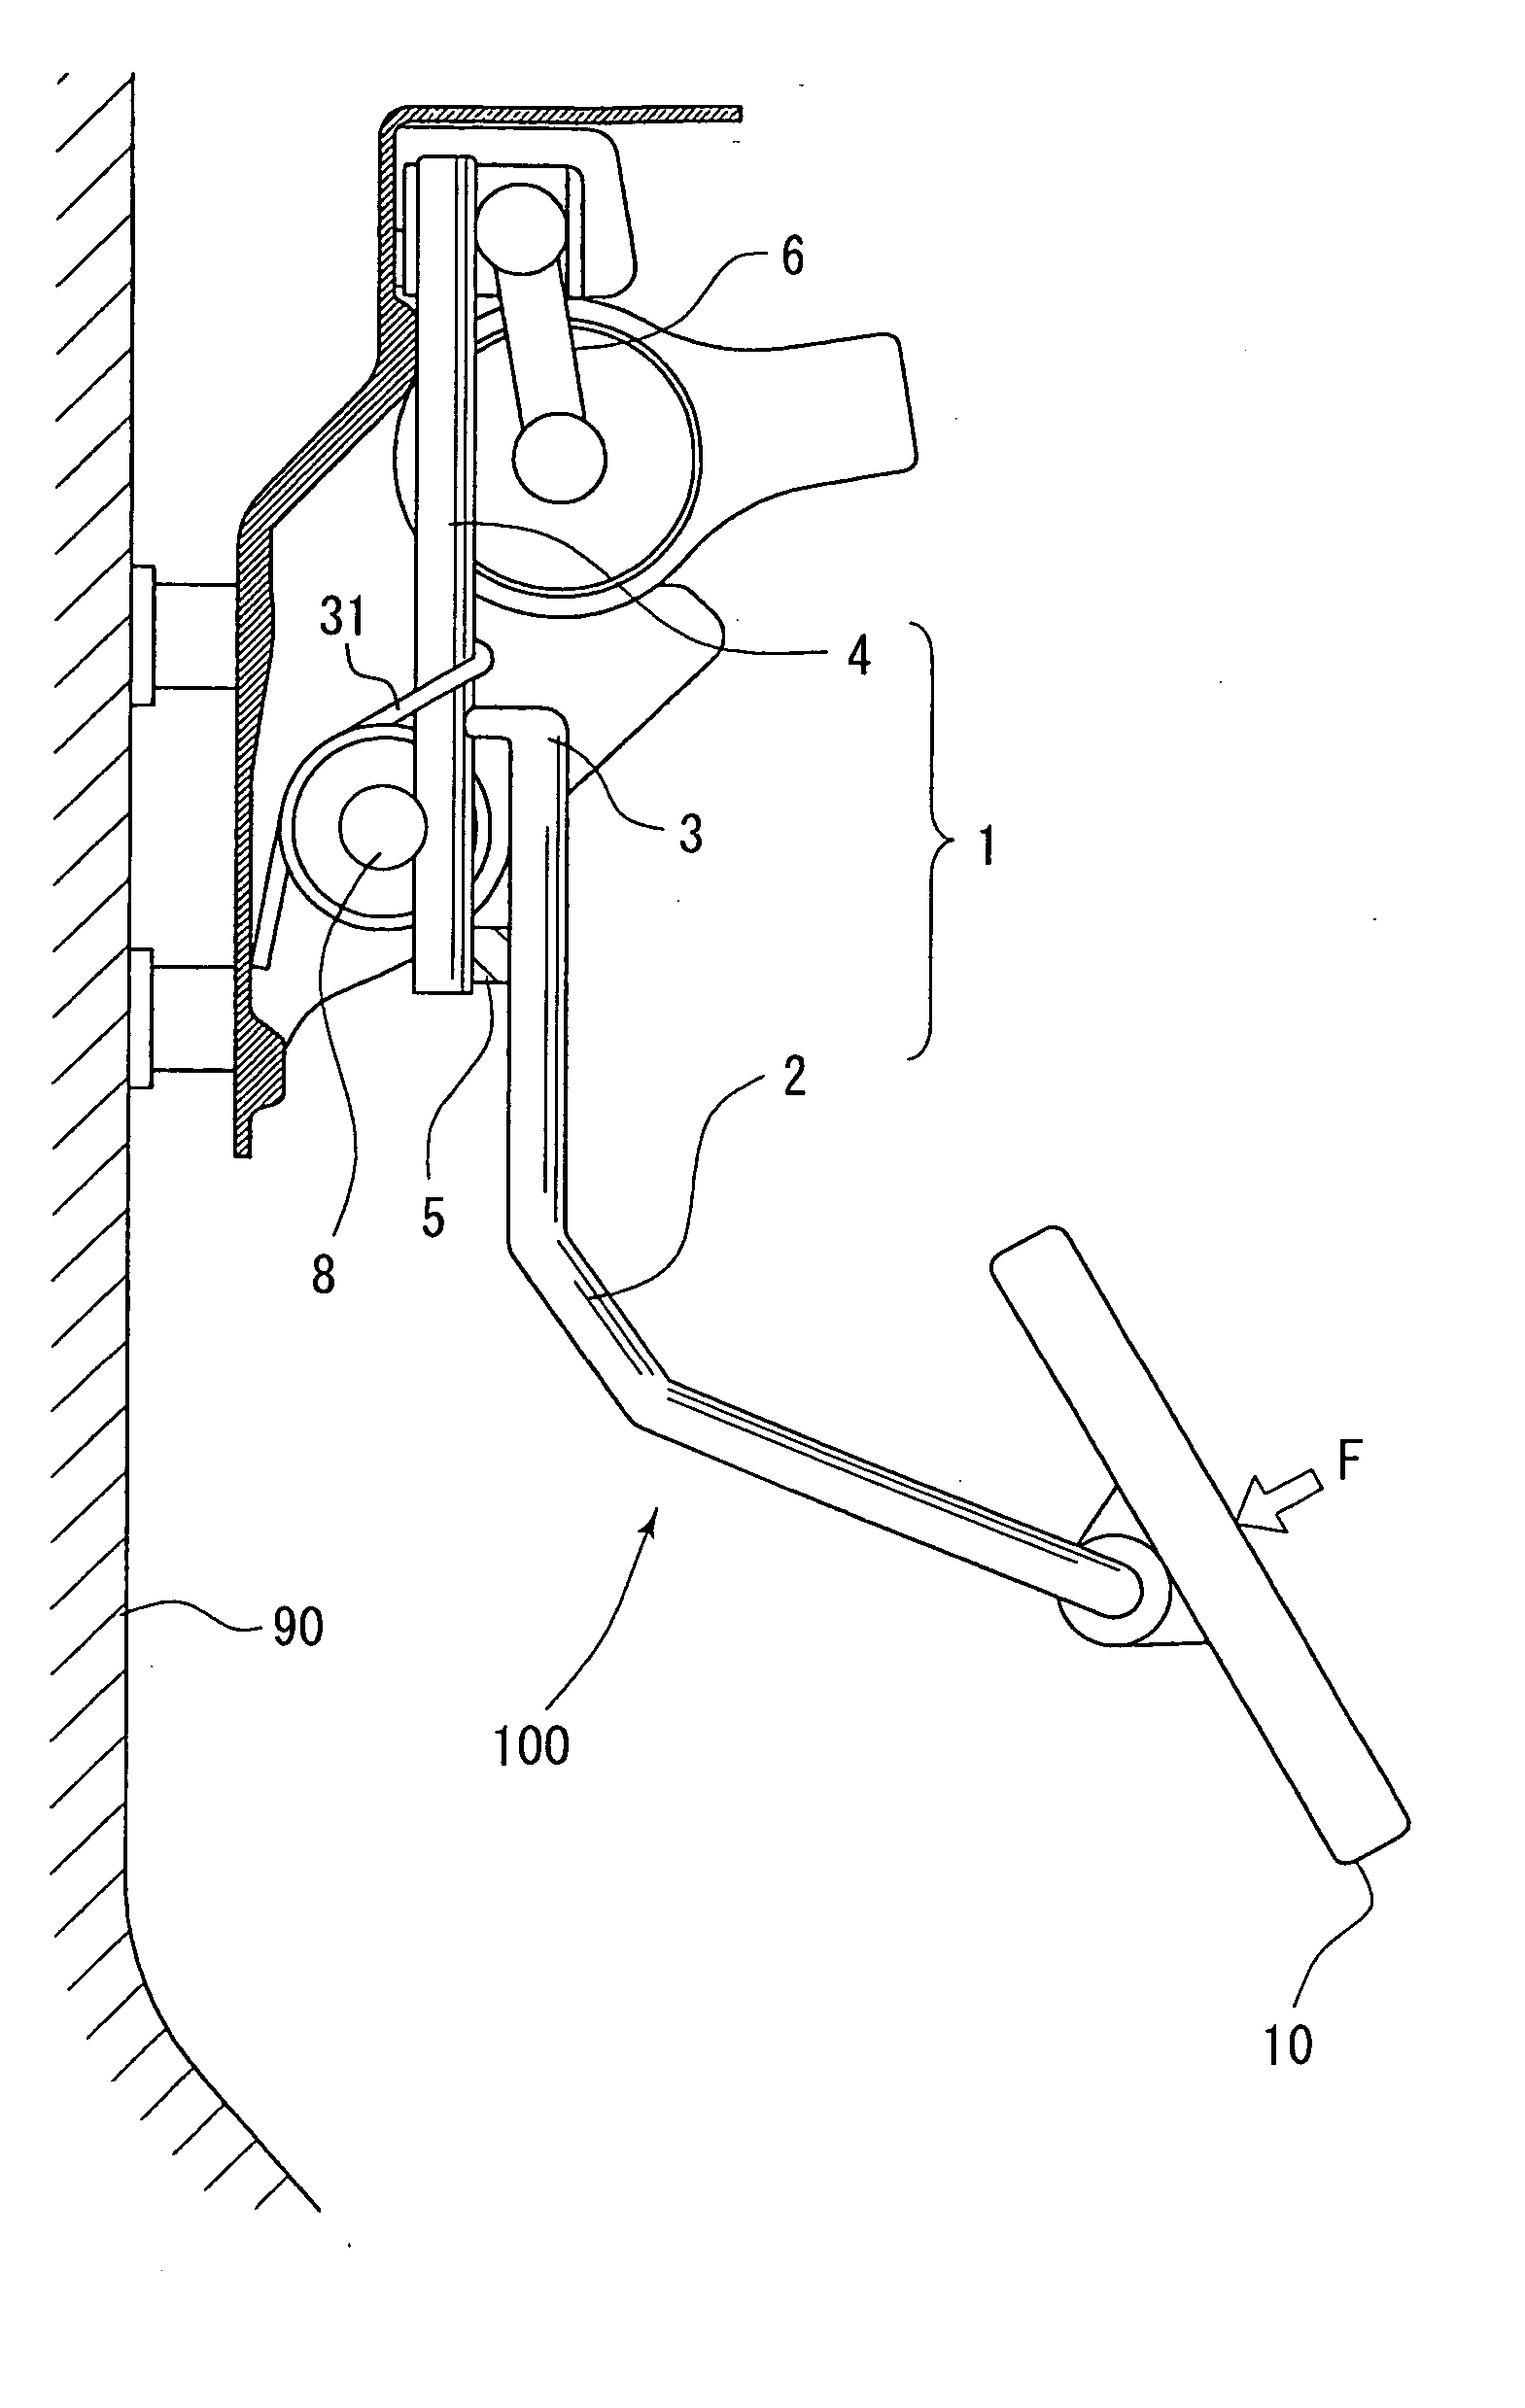 Pedal force detection device